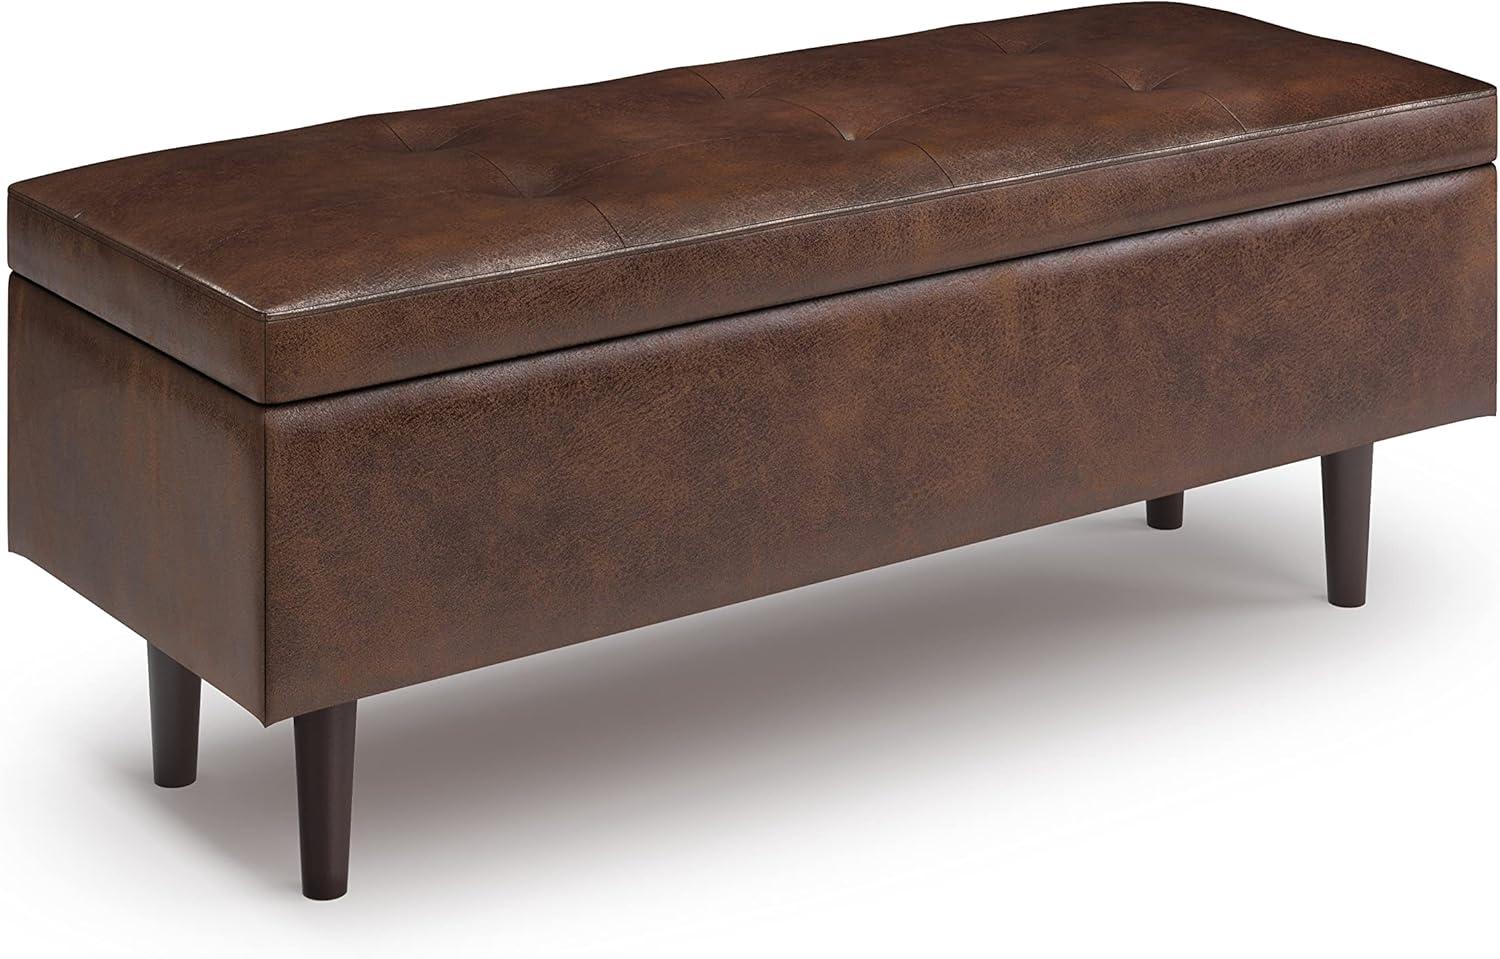 Shay Mid Century Distressed Chestnut Brown Faux Leather Storage Ottoman